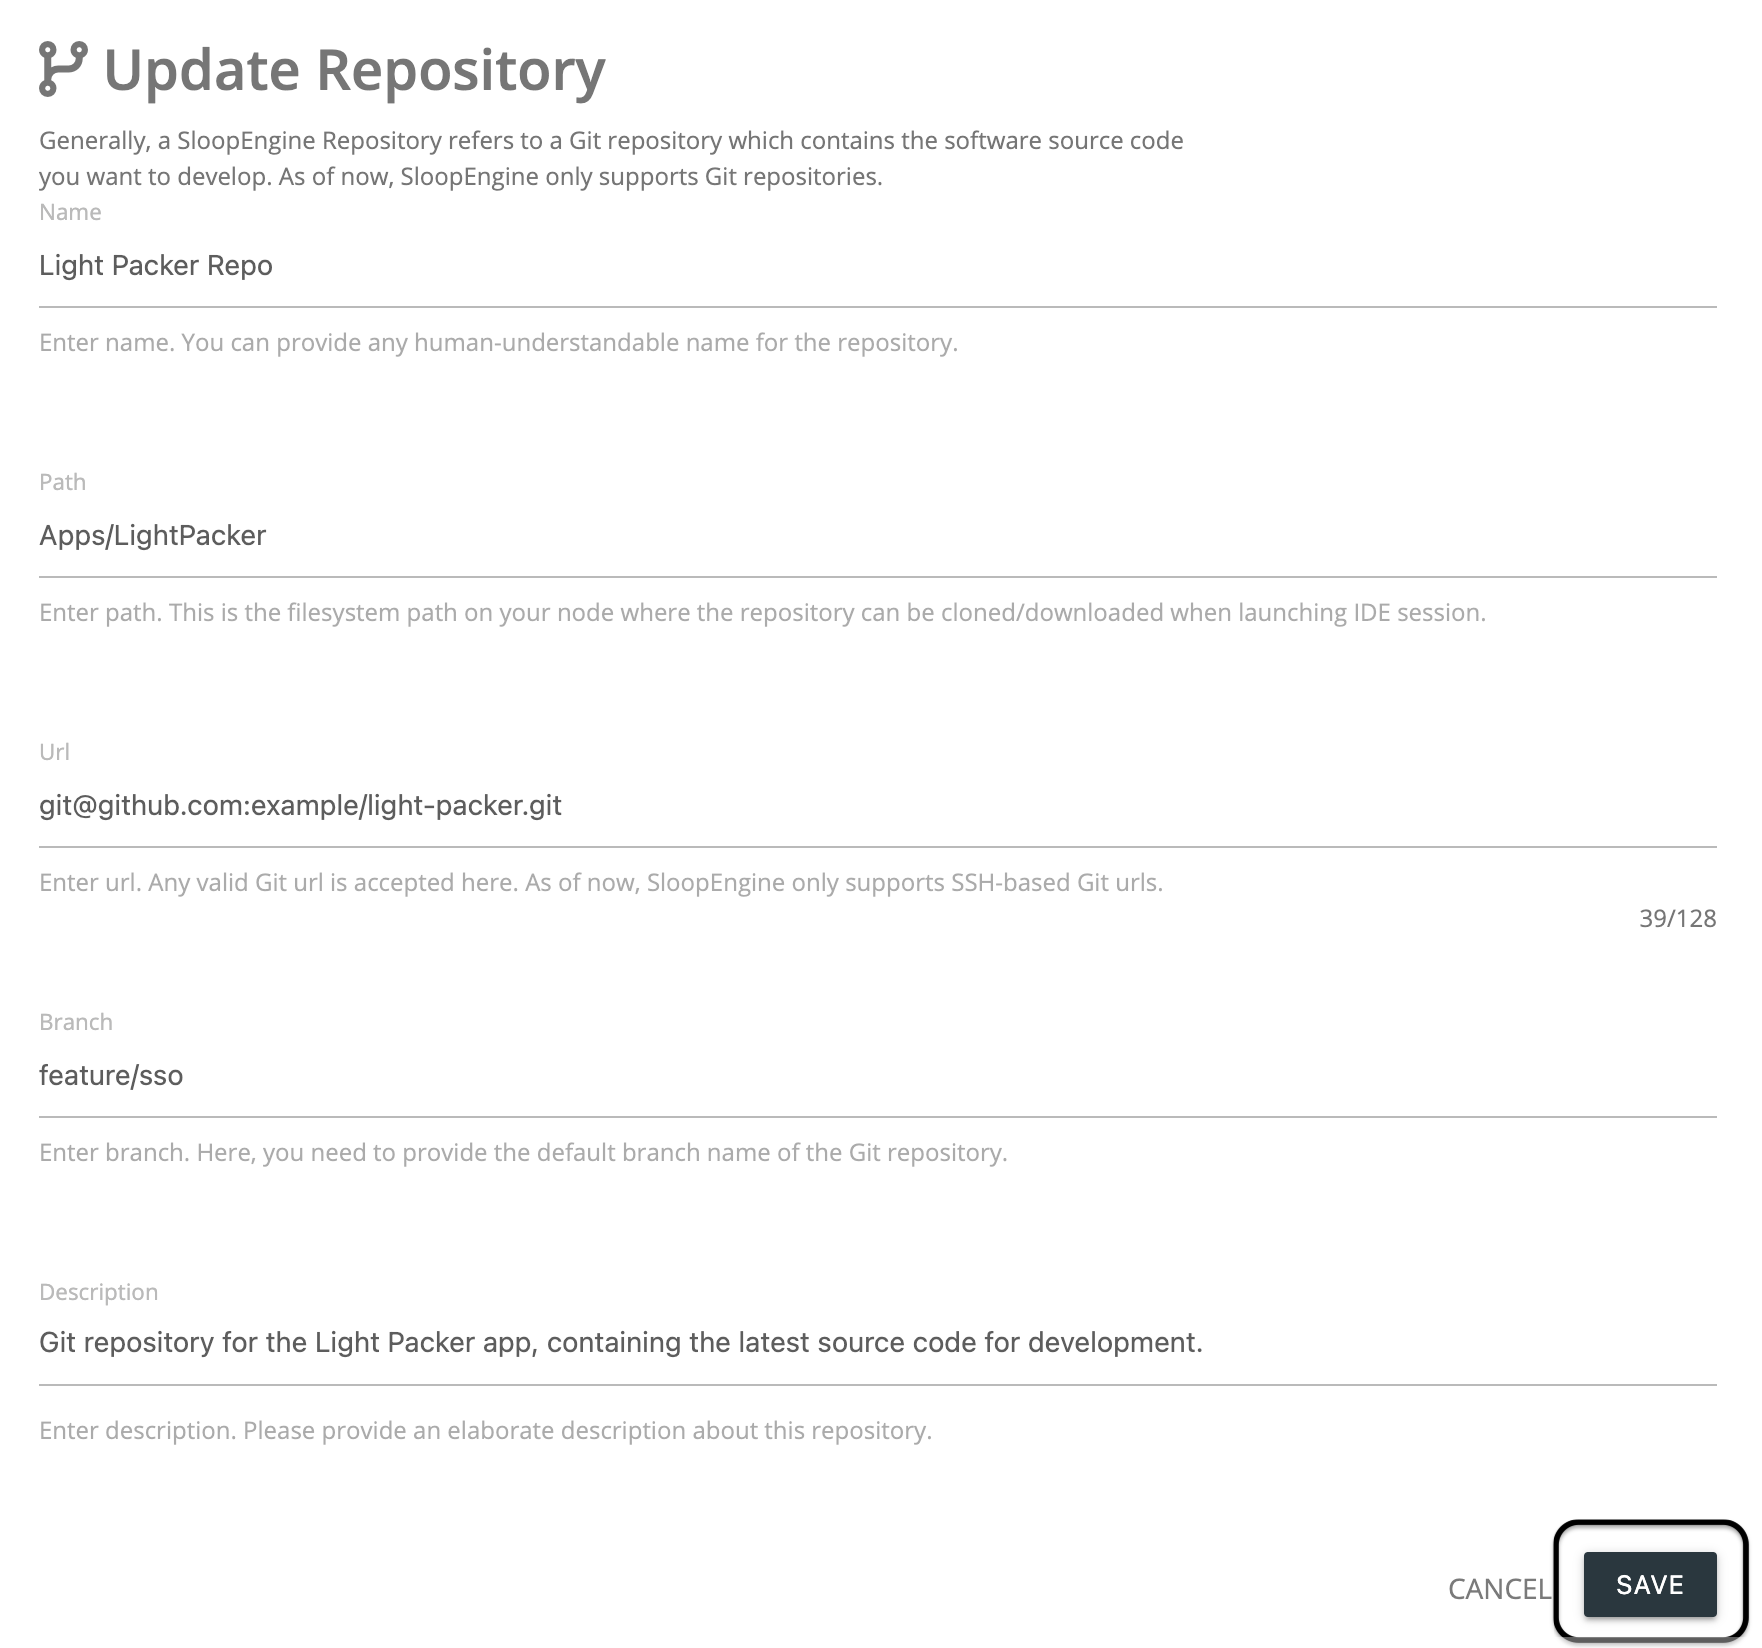 Screenshot of the repository updation form with valid information.